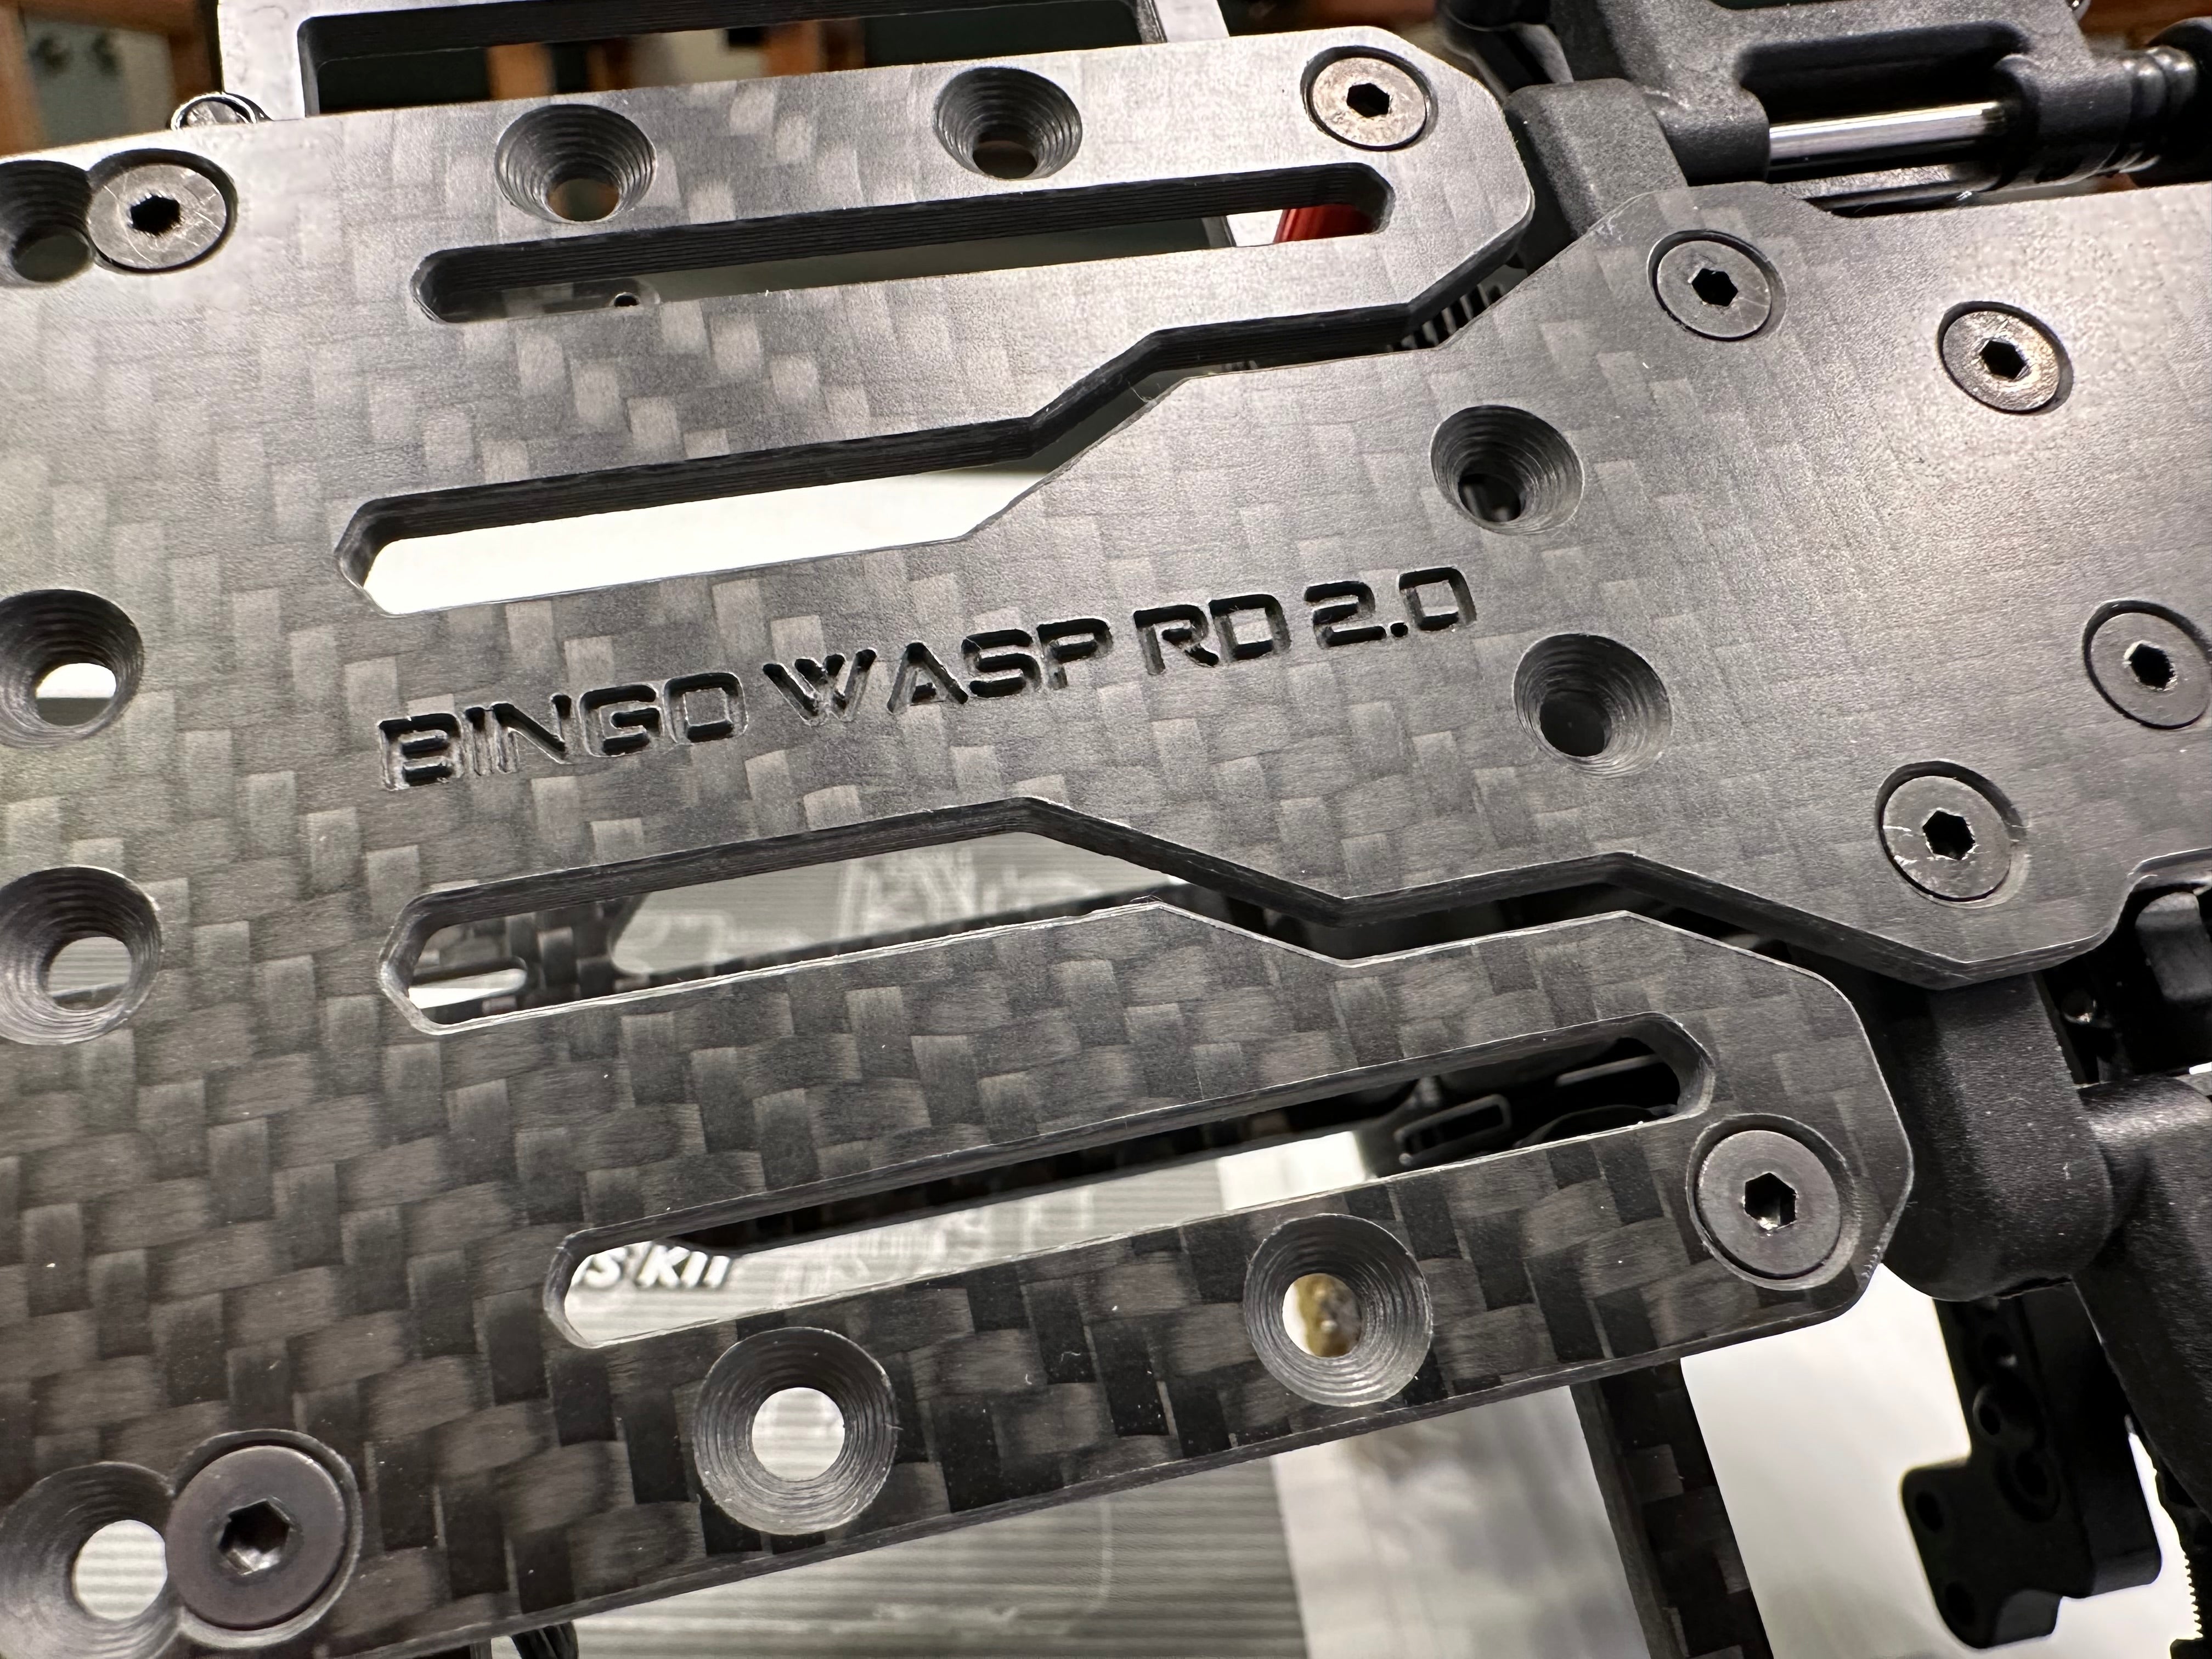 Bingo RC Designs WASP RD 2.0 Chassis